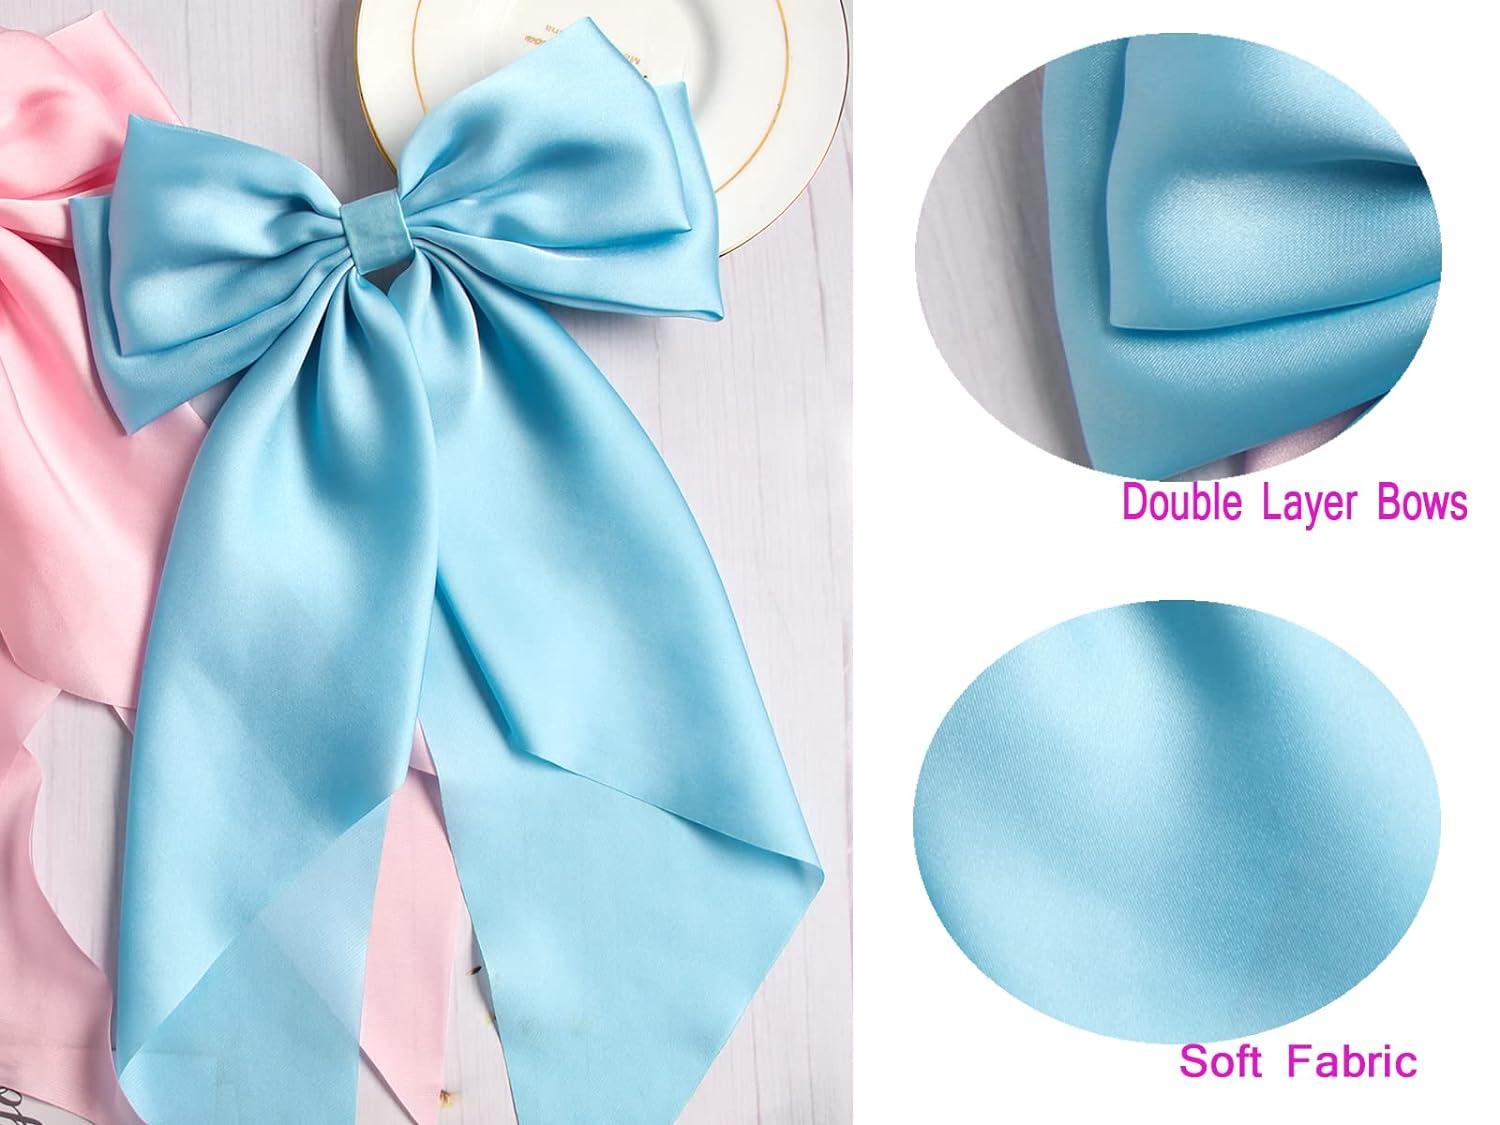 Furling Pompoms Hair Bow Clips for Women,White Hair Bows Clips,2pcs Long  Tail Ribbons Bows, Big Satin Bows Hairpins Barrettes Girls Hair Accessories